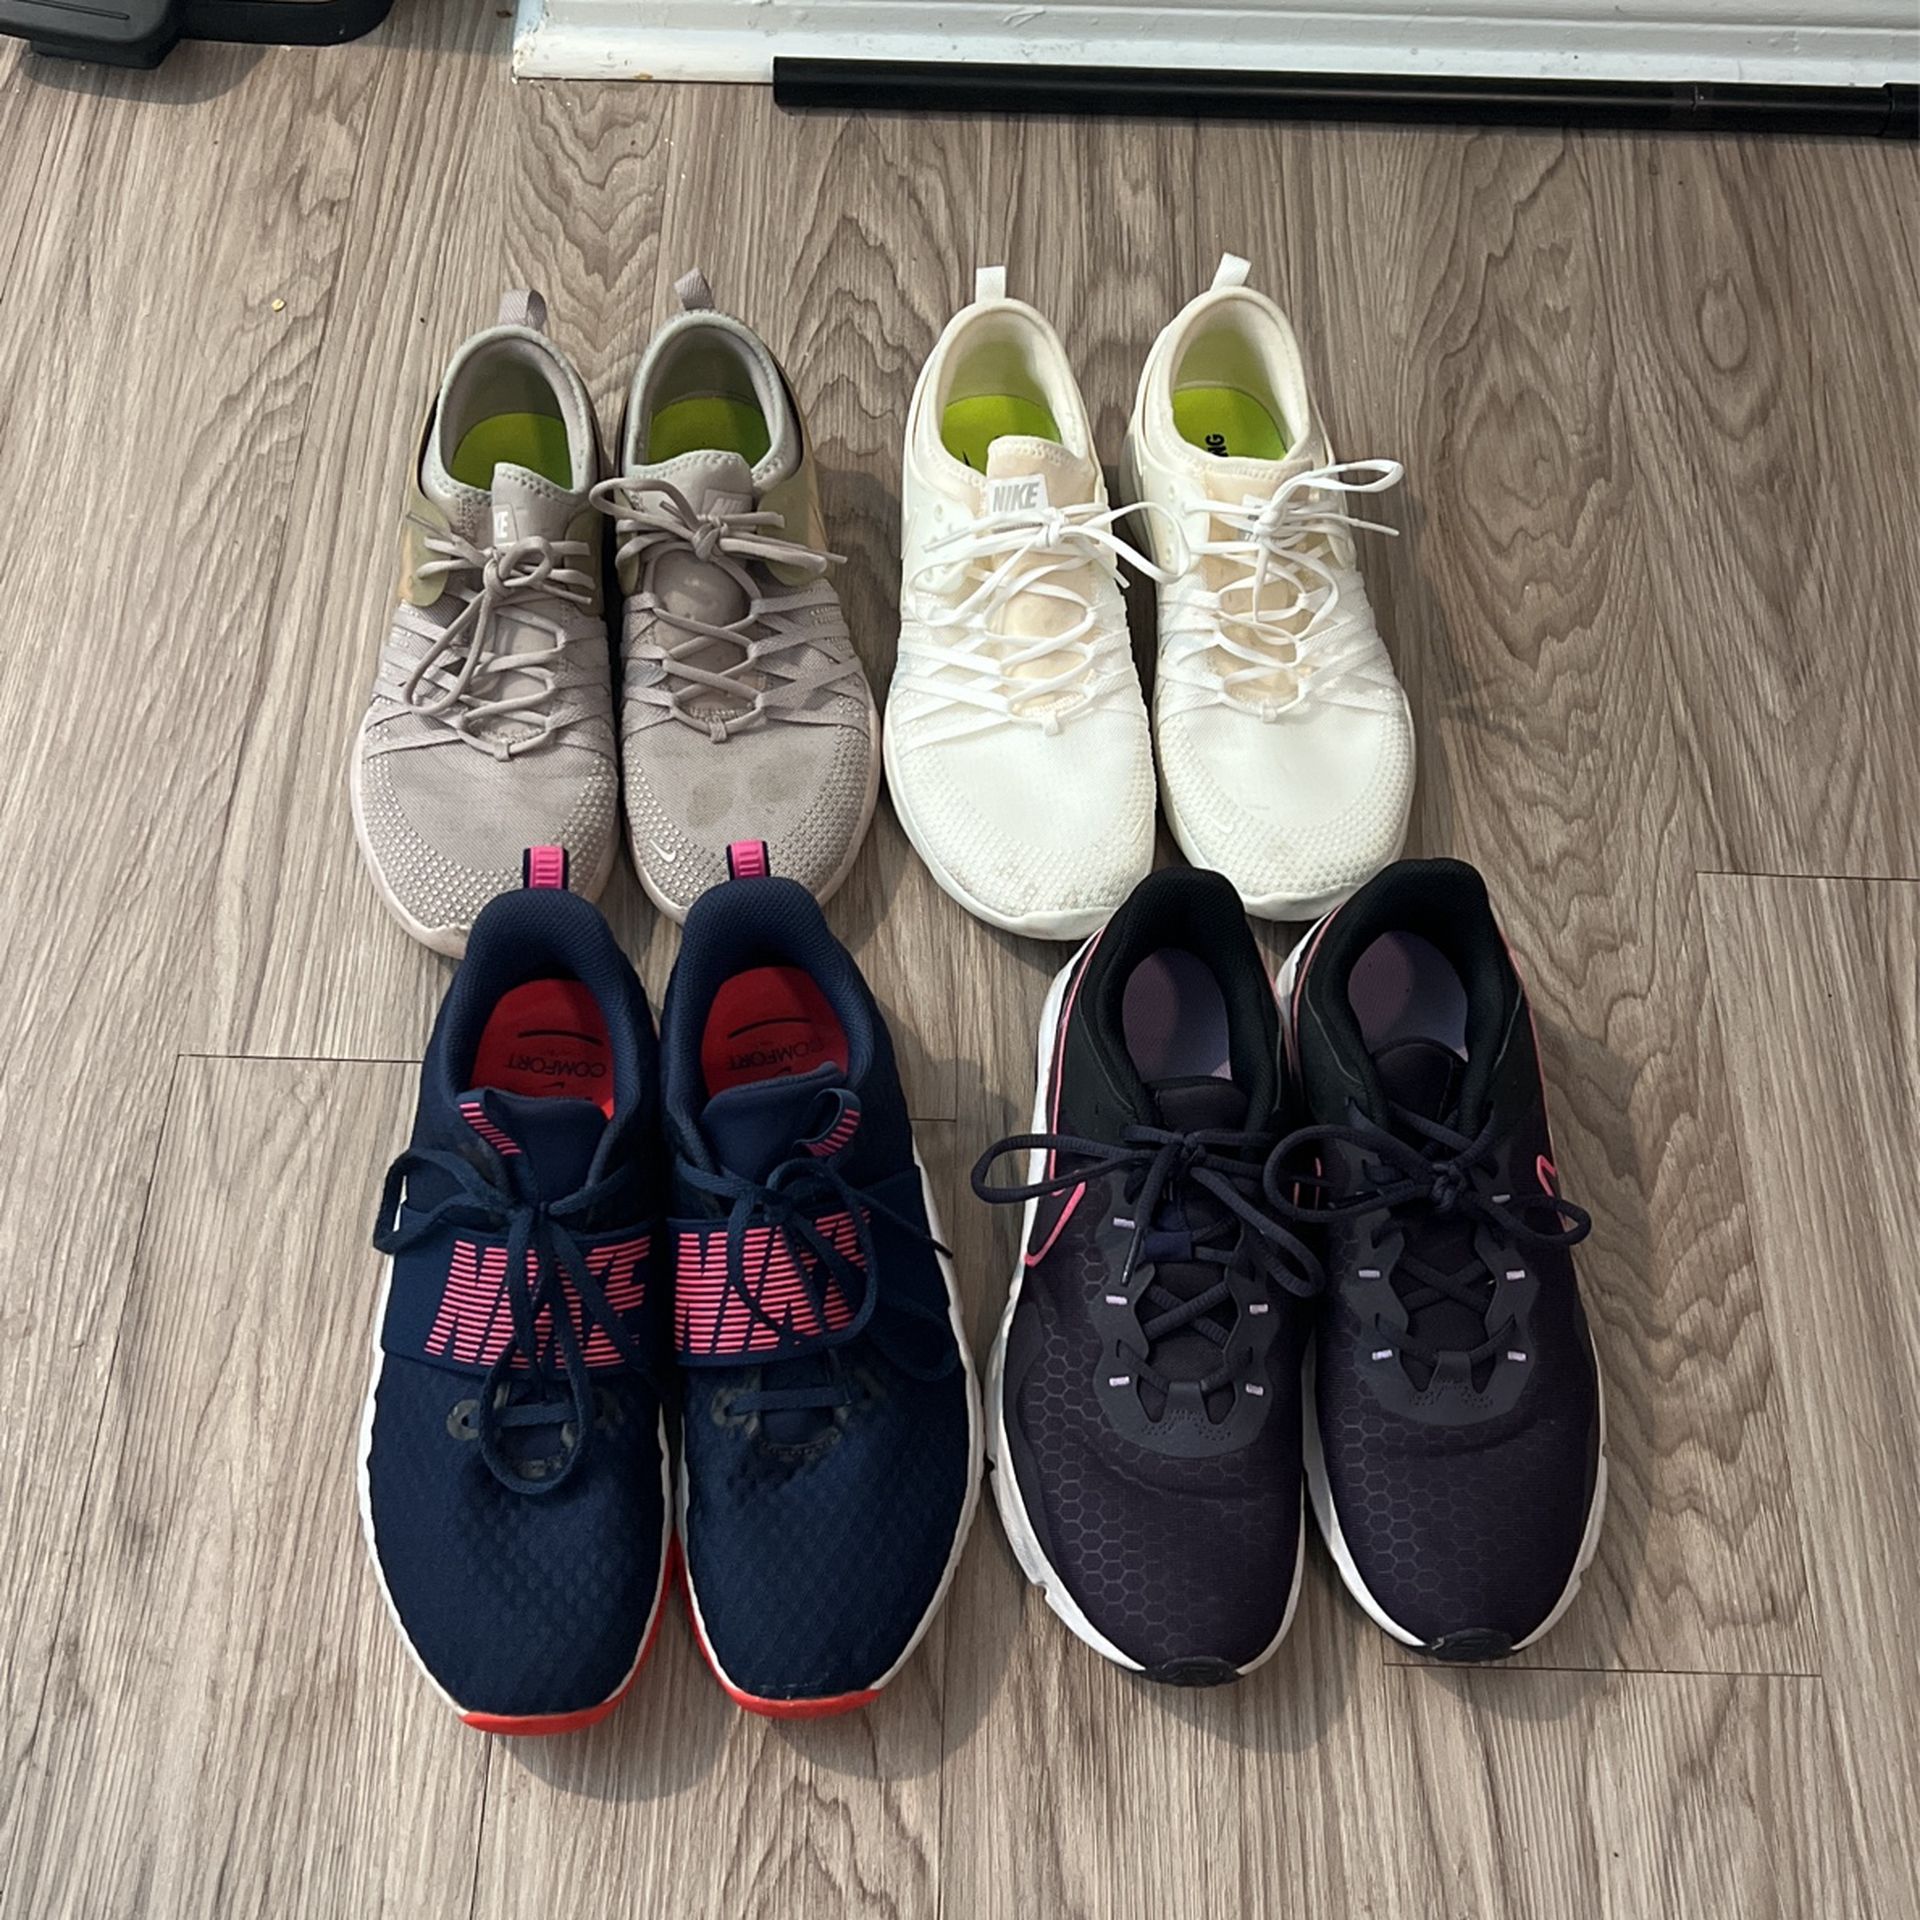 4 Pairs Nike Shoes